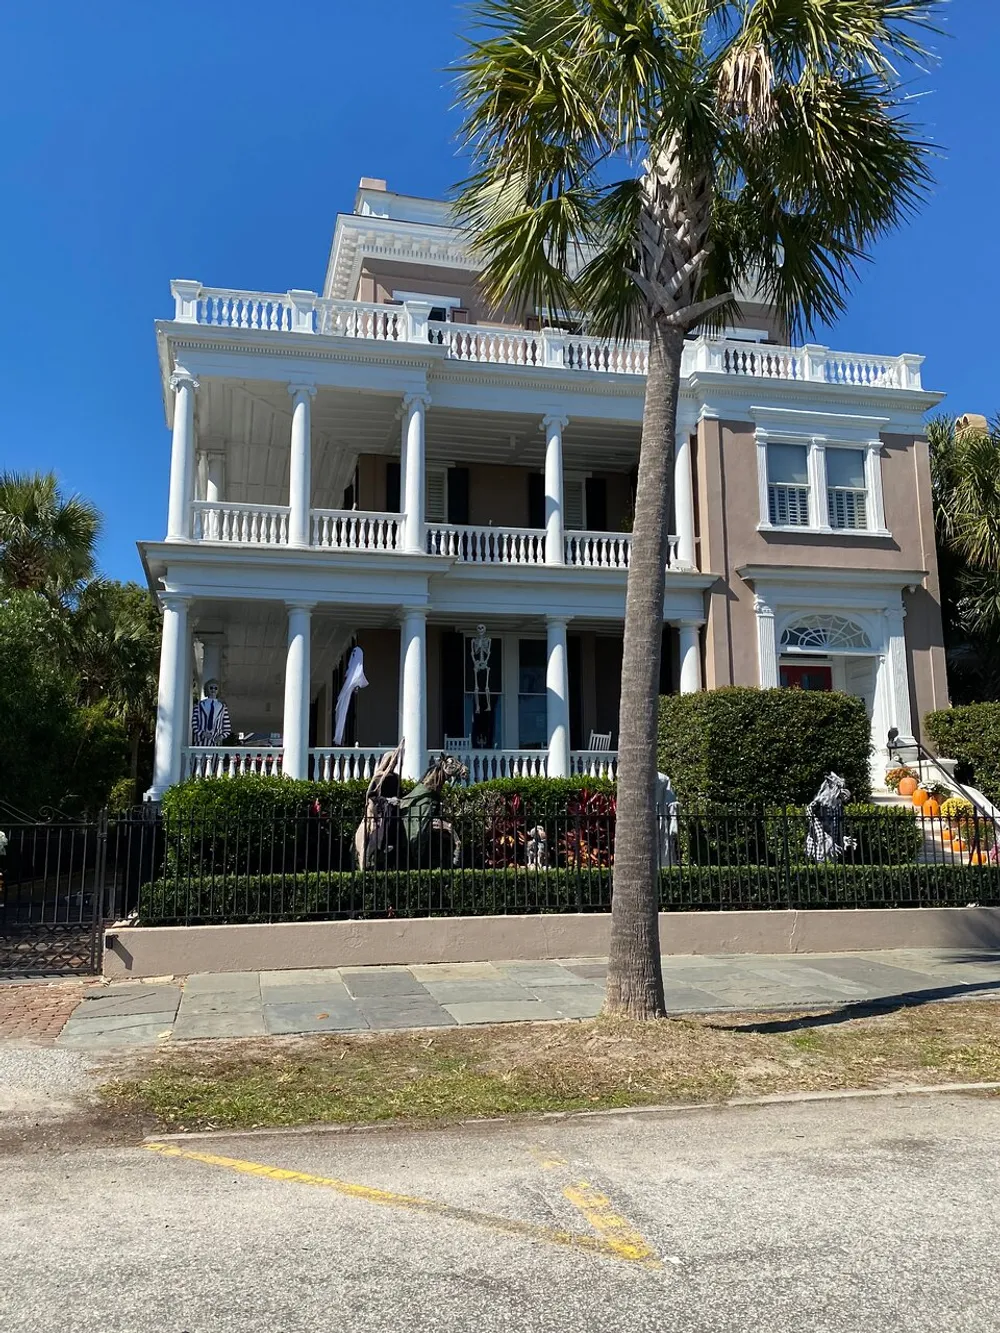 The image shows a grand multi-story house with double-decker porches adorned with white columns set behind a black iron fence with Halloween decorations visible all under a clear blue sky